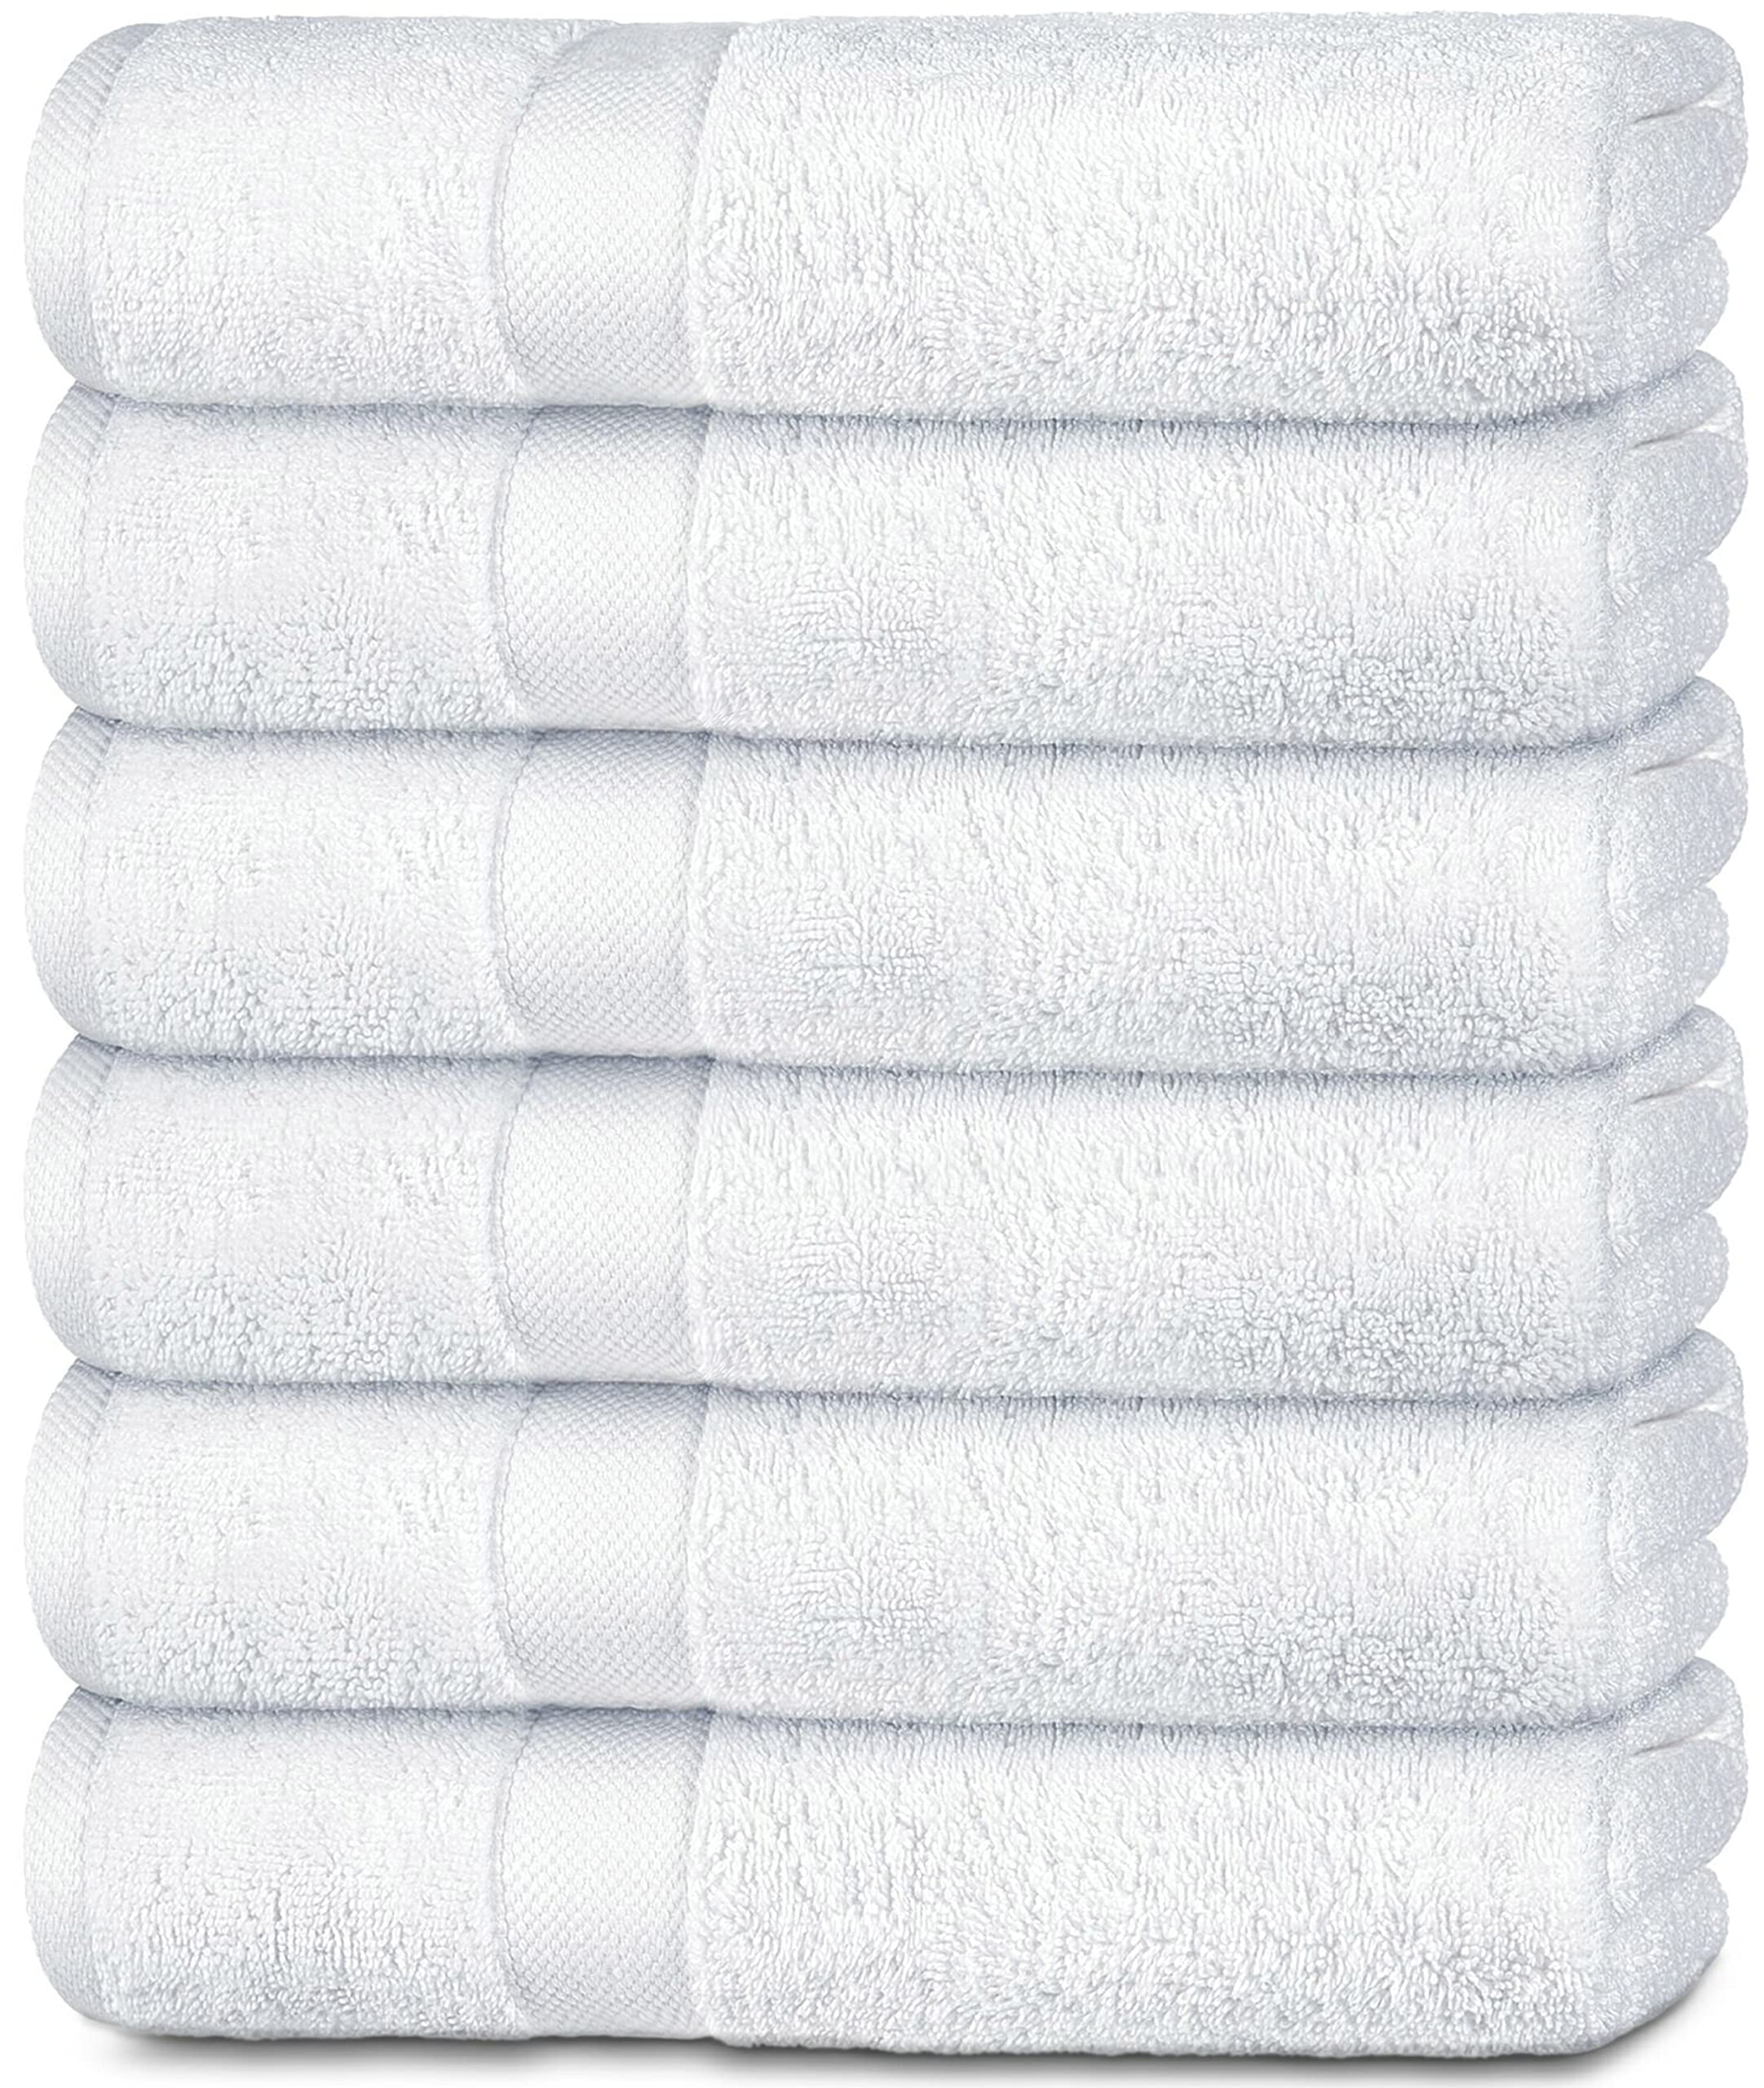 Gold Textiles 4 Pack Premium Cotton Bath Sheets (Bright White, 30x60 inch) Luxury Bath Towel Perfect for Pool and Gym Ring Spun Cotton (White)